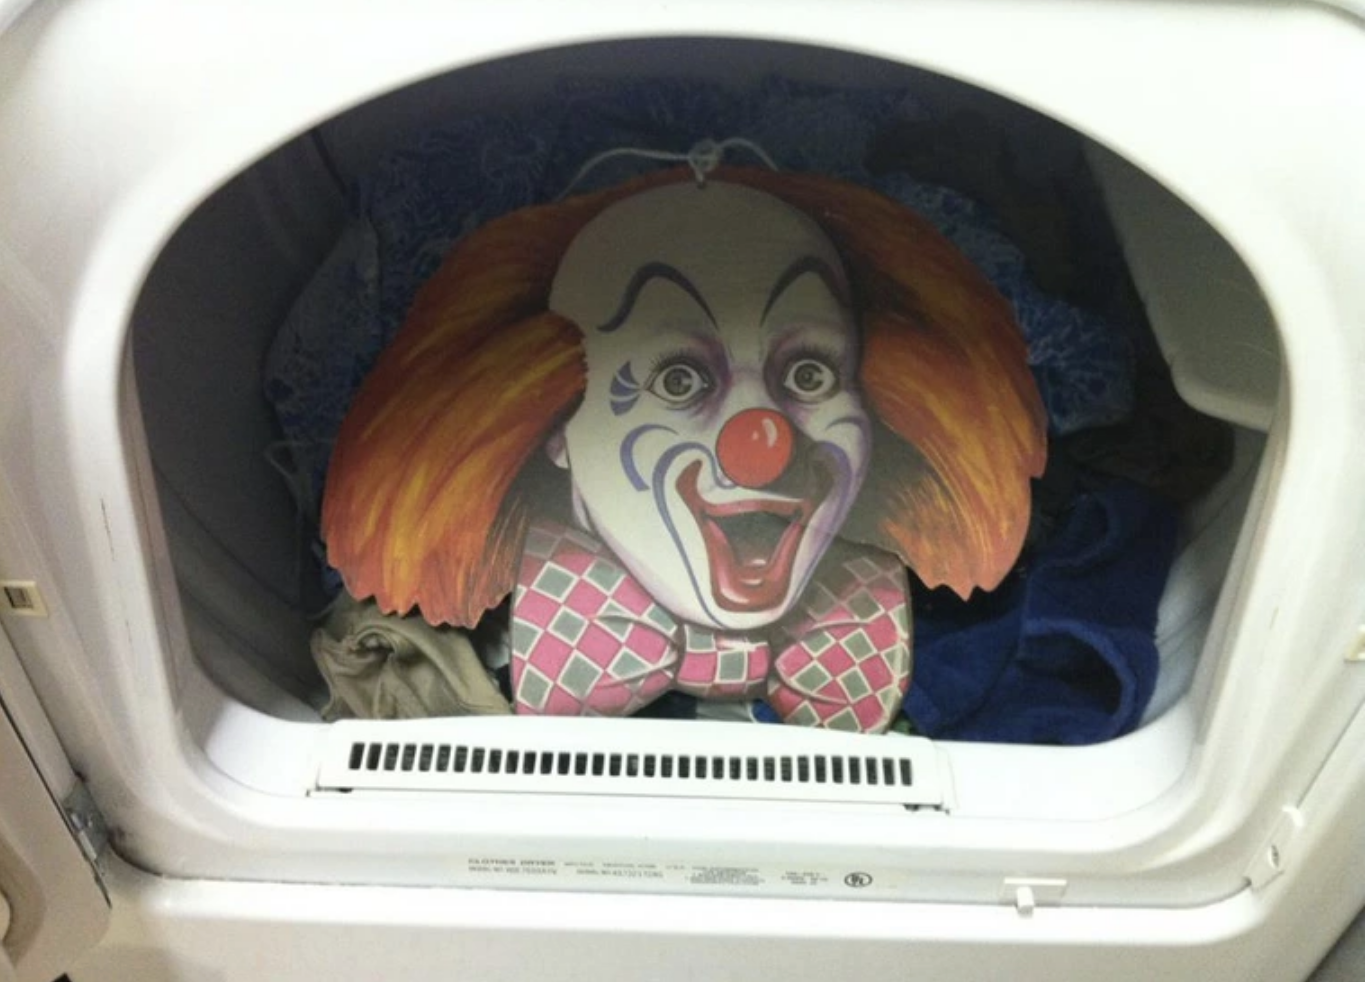 A large clown head was put on top of the pile of clothes in the dryer to scare the person who opened the drier